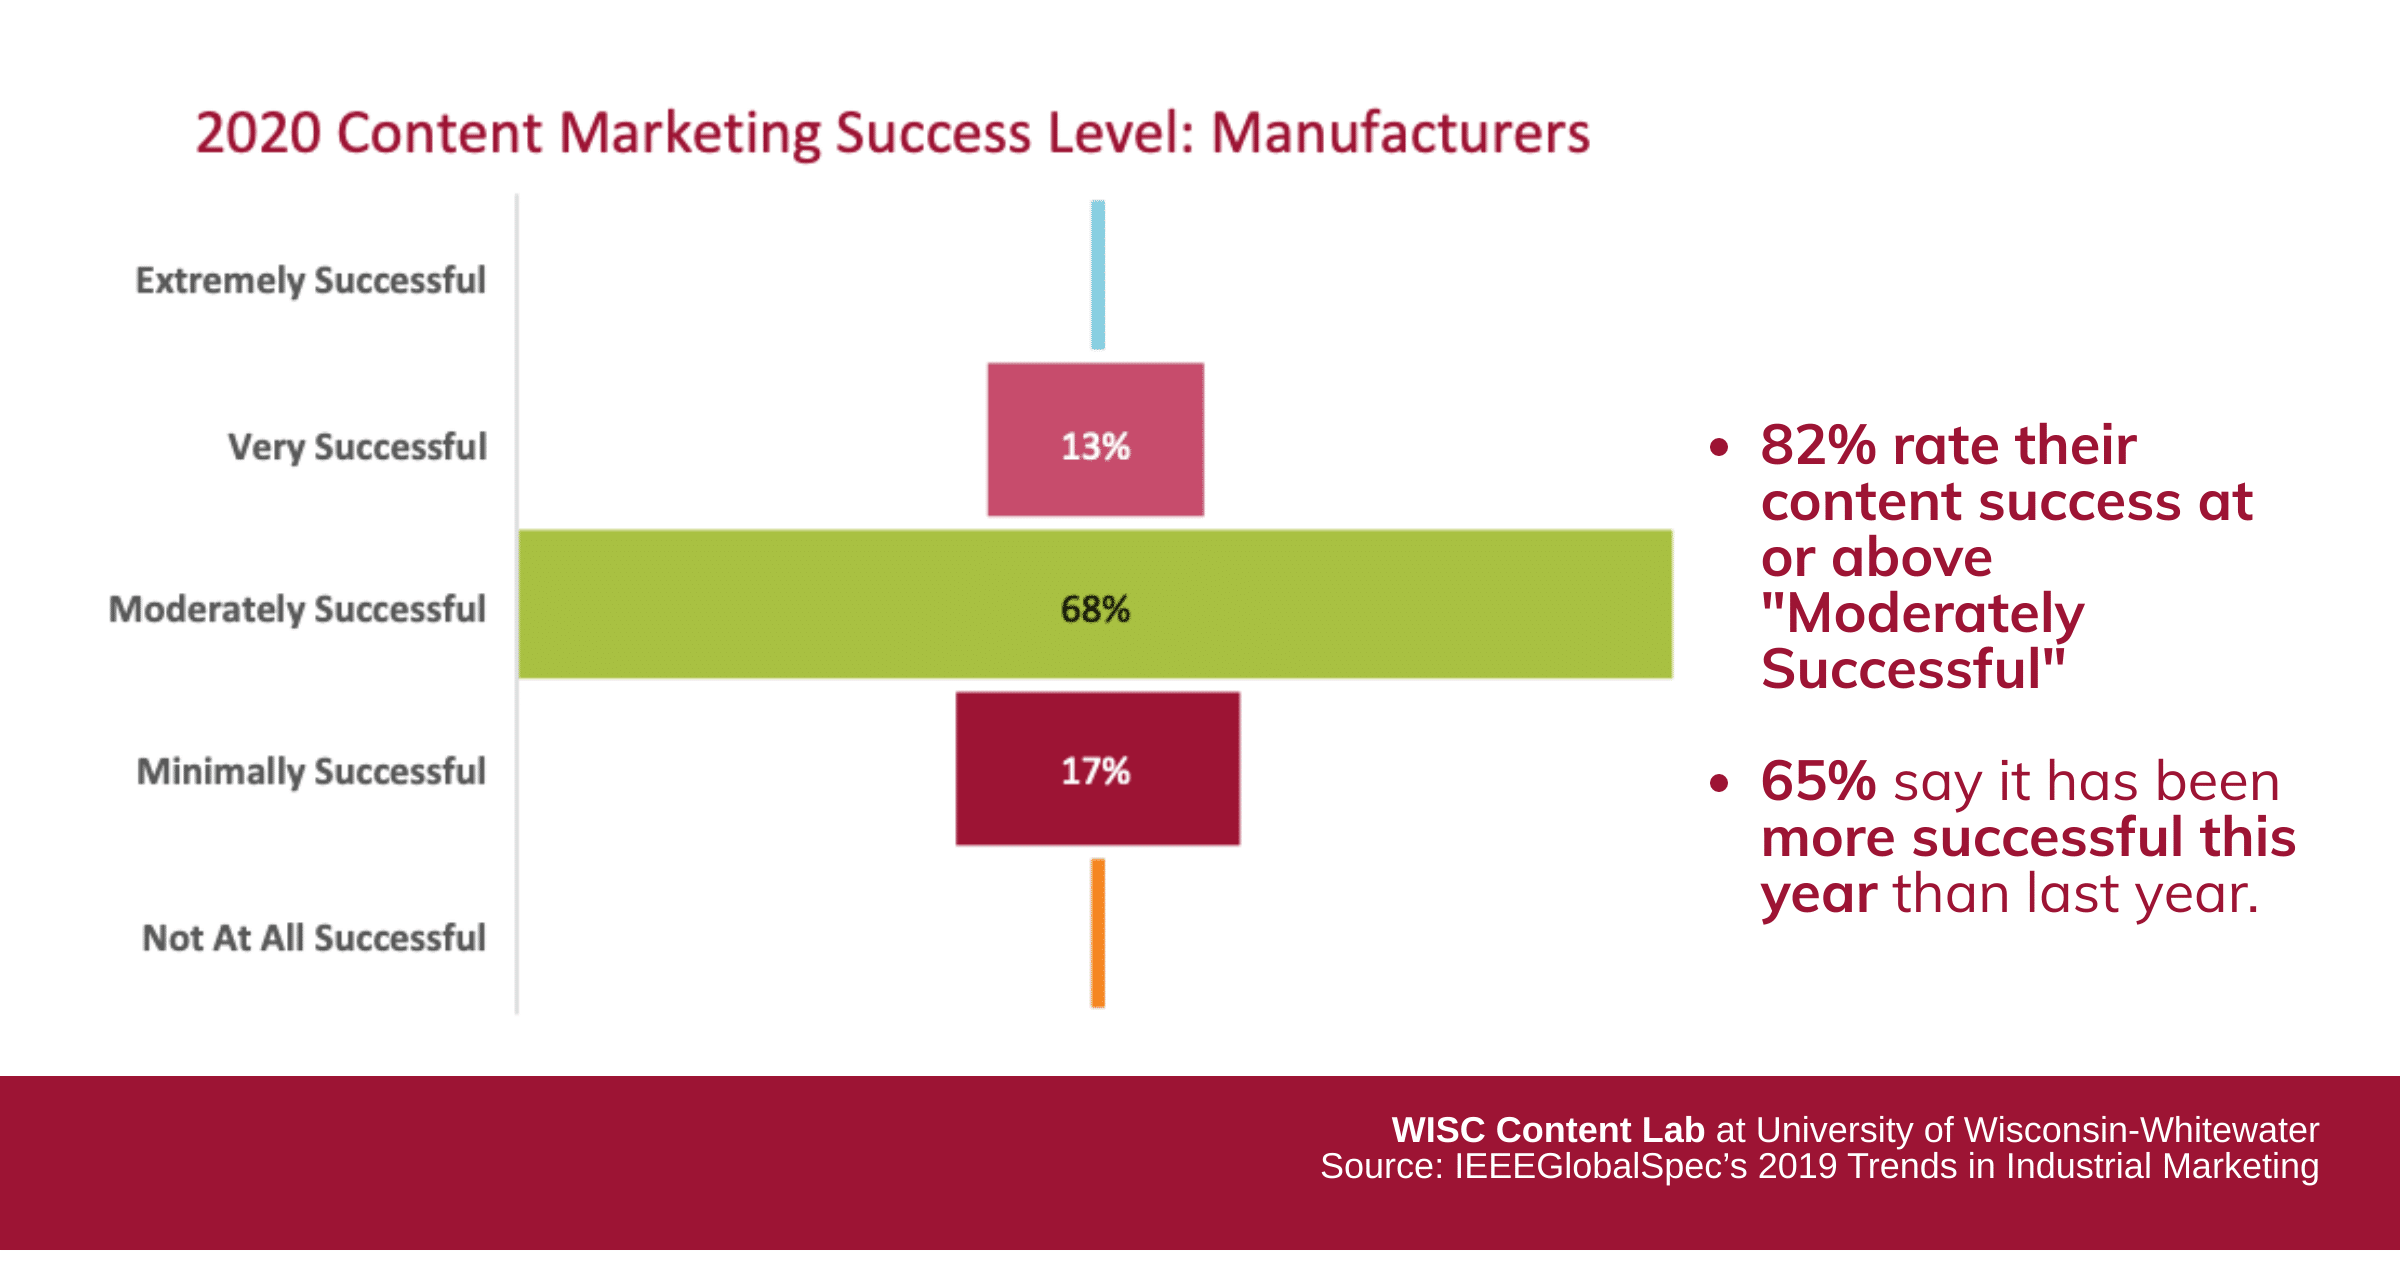 Content Marketing Success in Manufacturing 